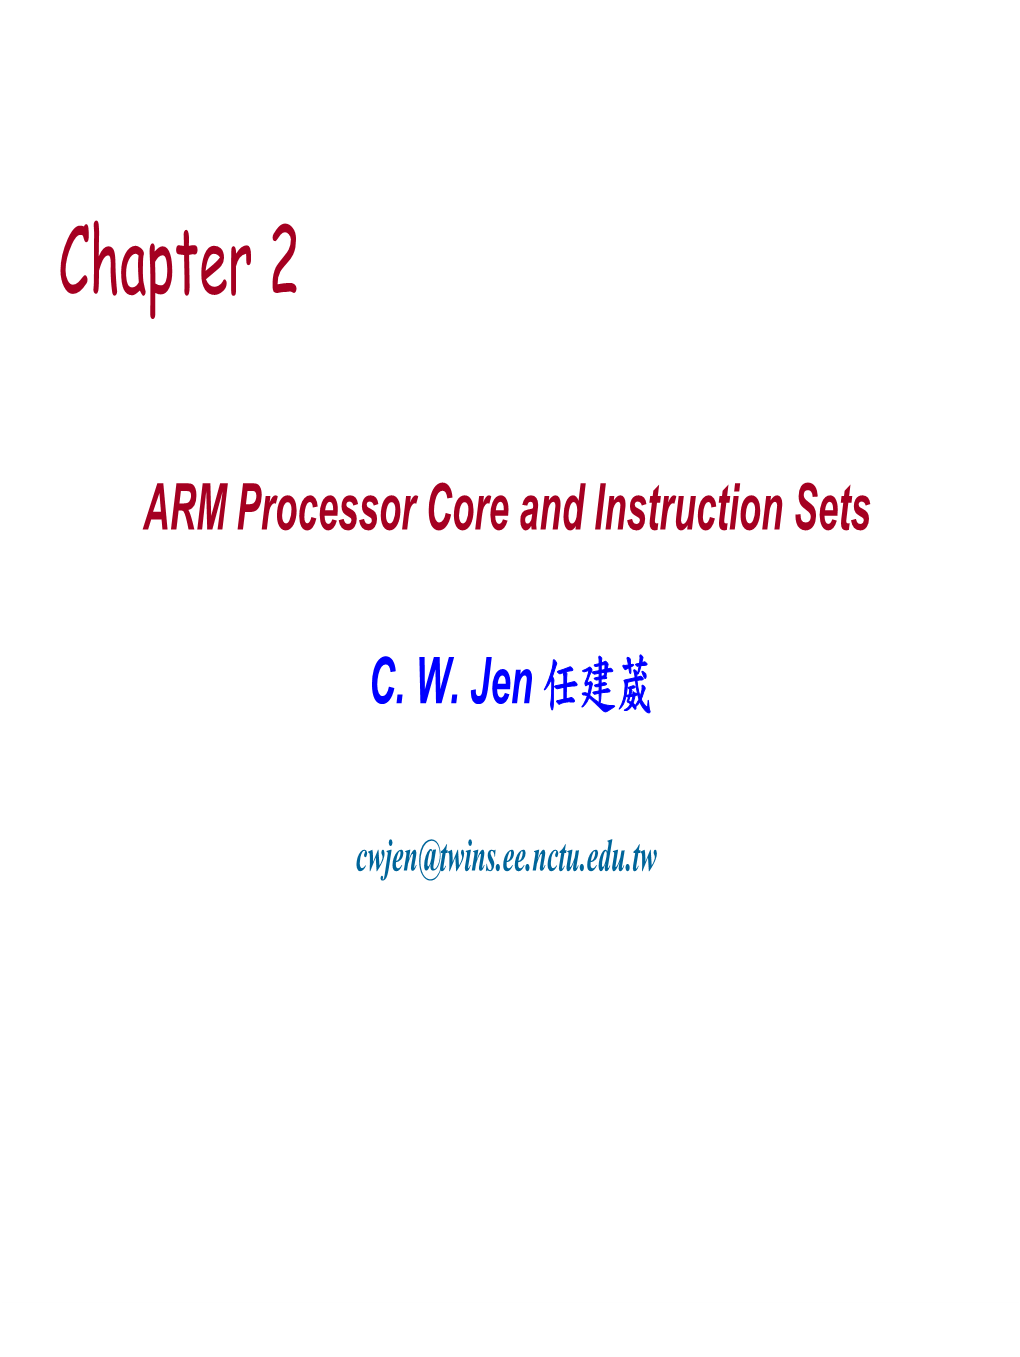 ARM Processor Core and Instruction Sets